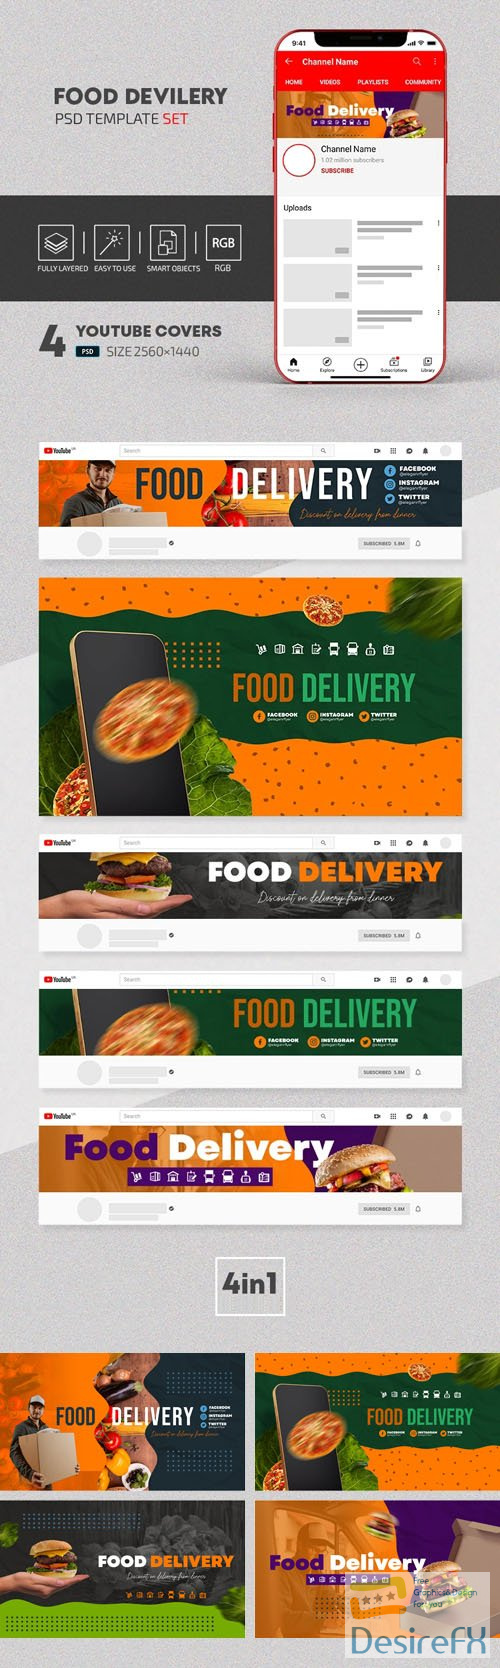 Food Devilery - Youtube Banners PSD Templates